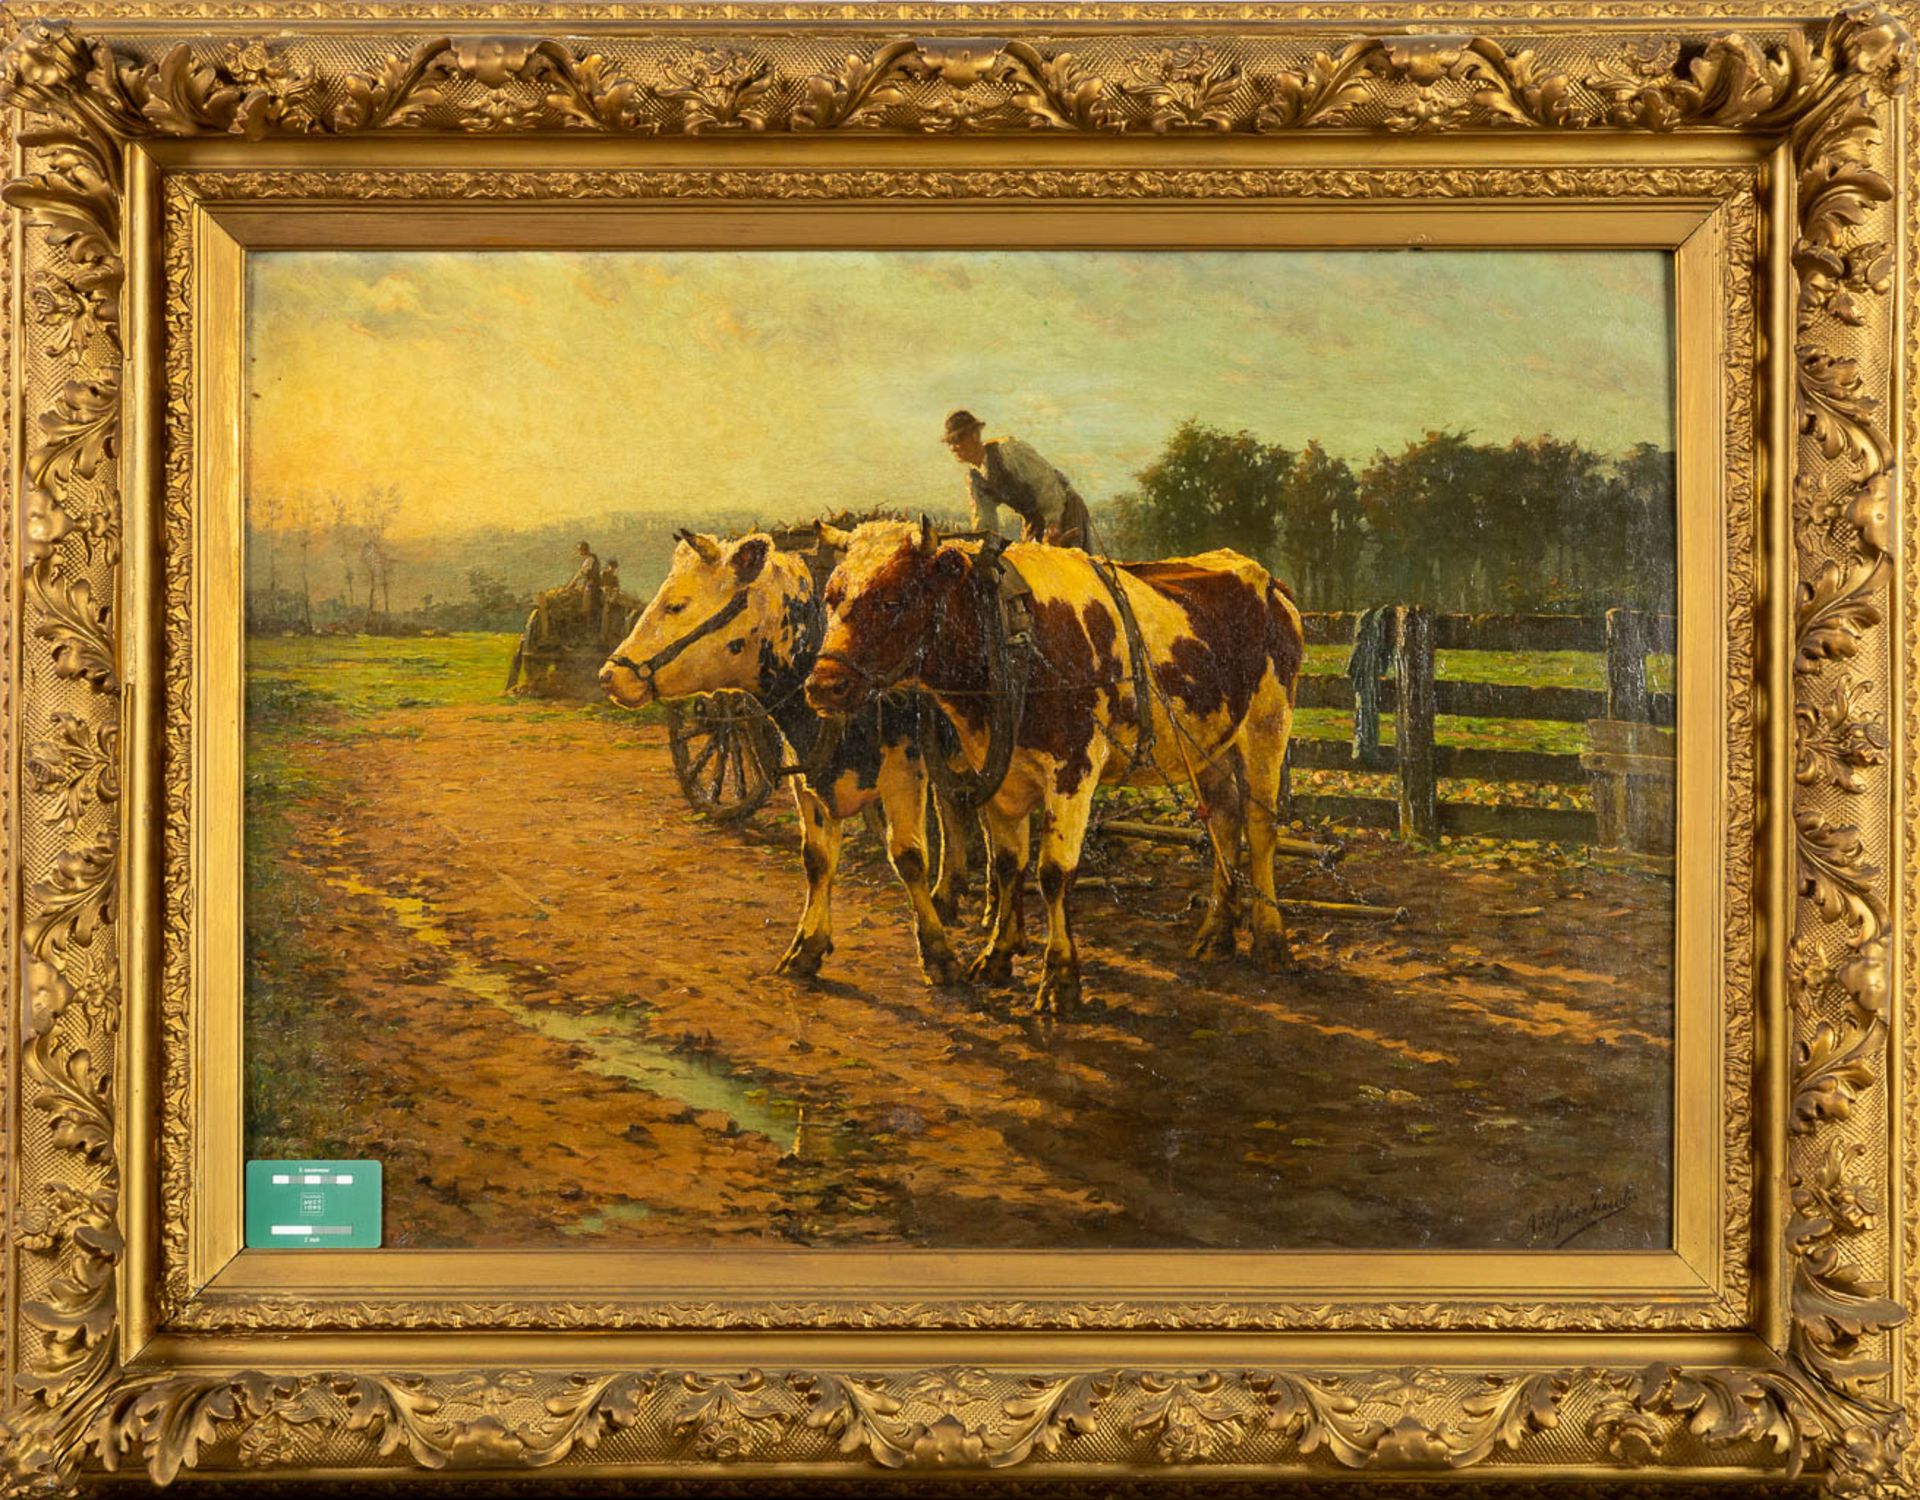 Adolphe JACOBS (1859-1940) 'Cattle hauling a cart' oil on canvas. (W:92 x H:71 cm) - Image 2 of 9